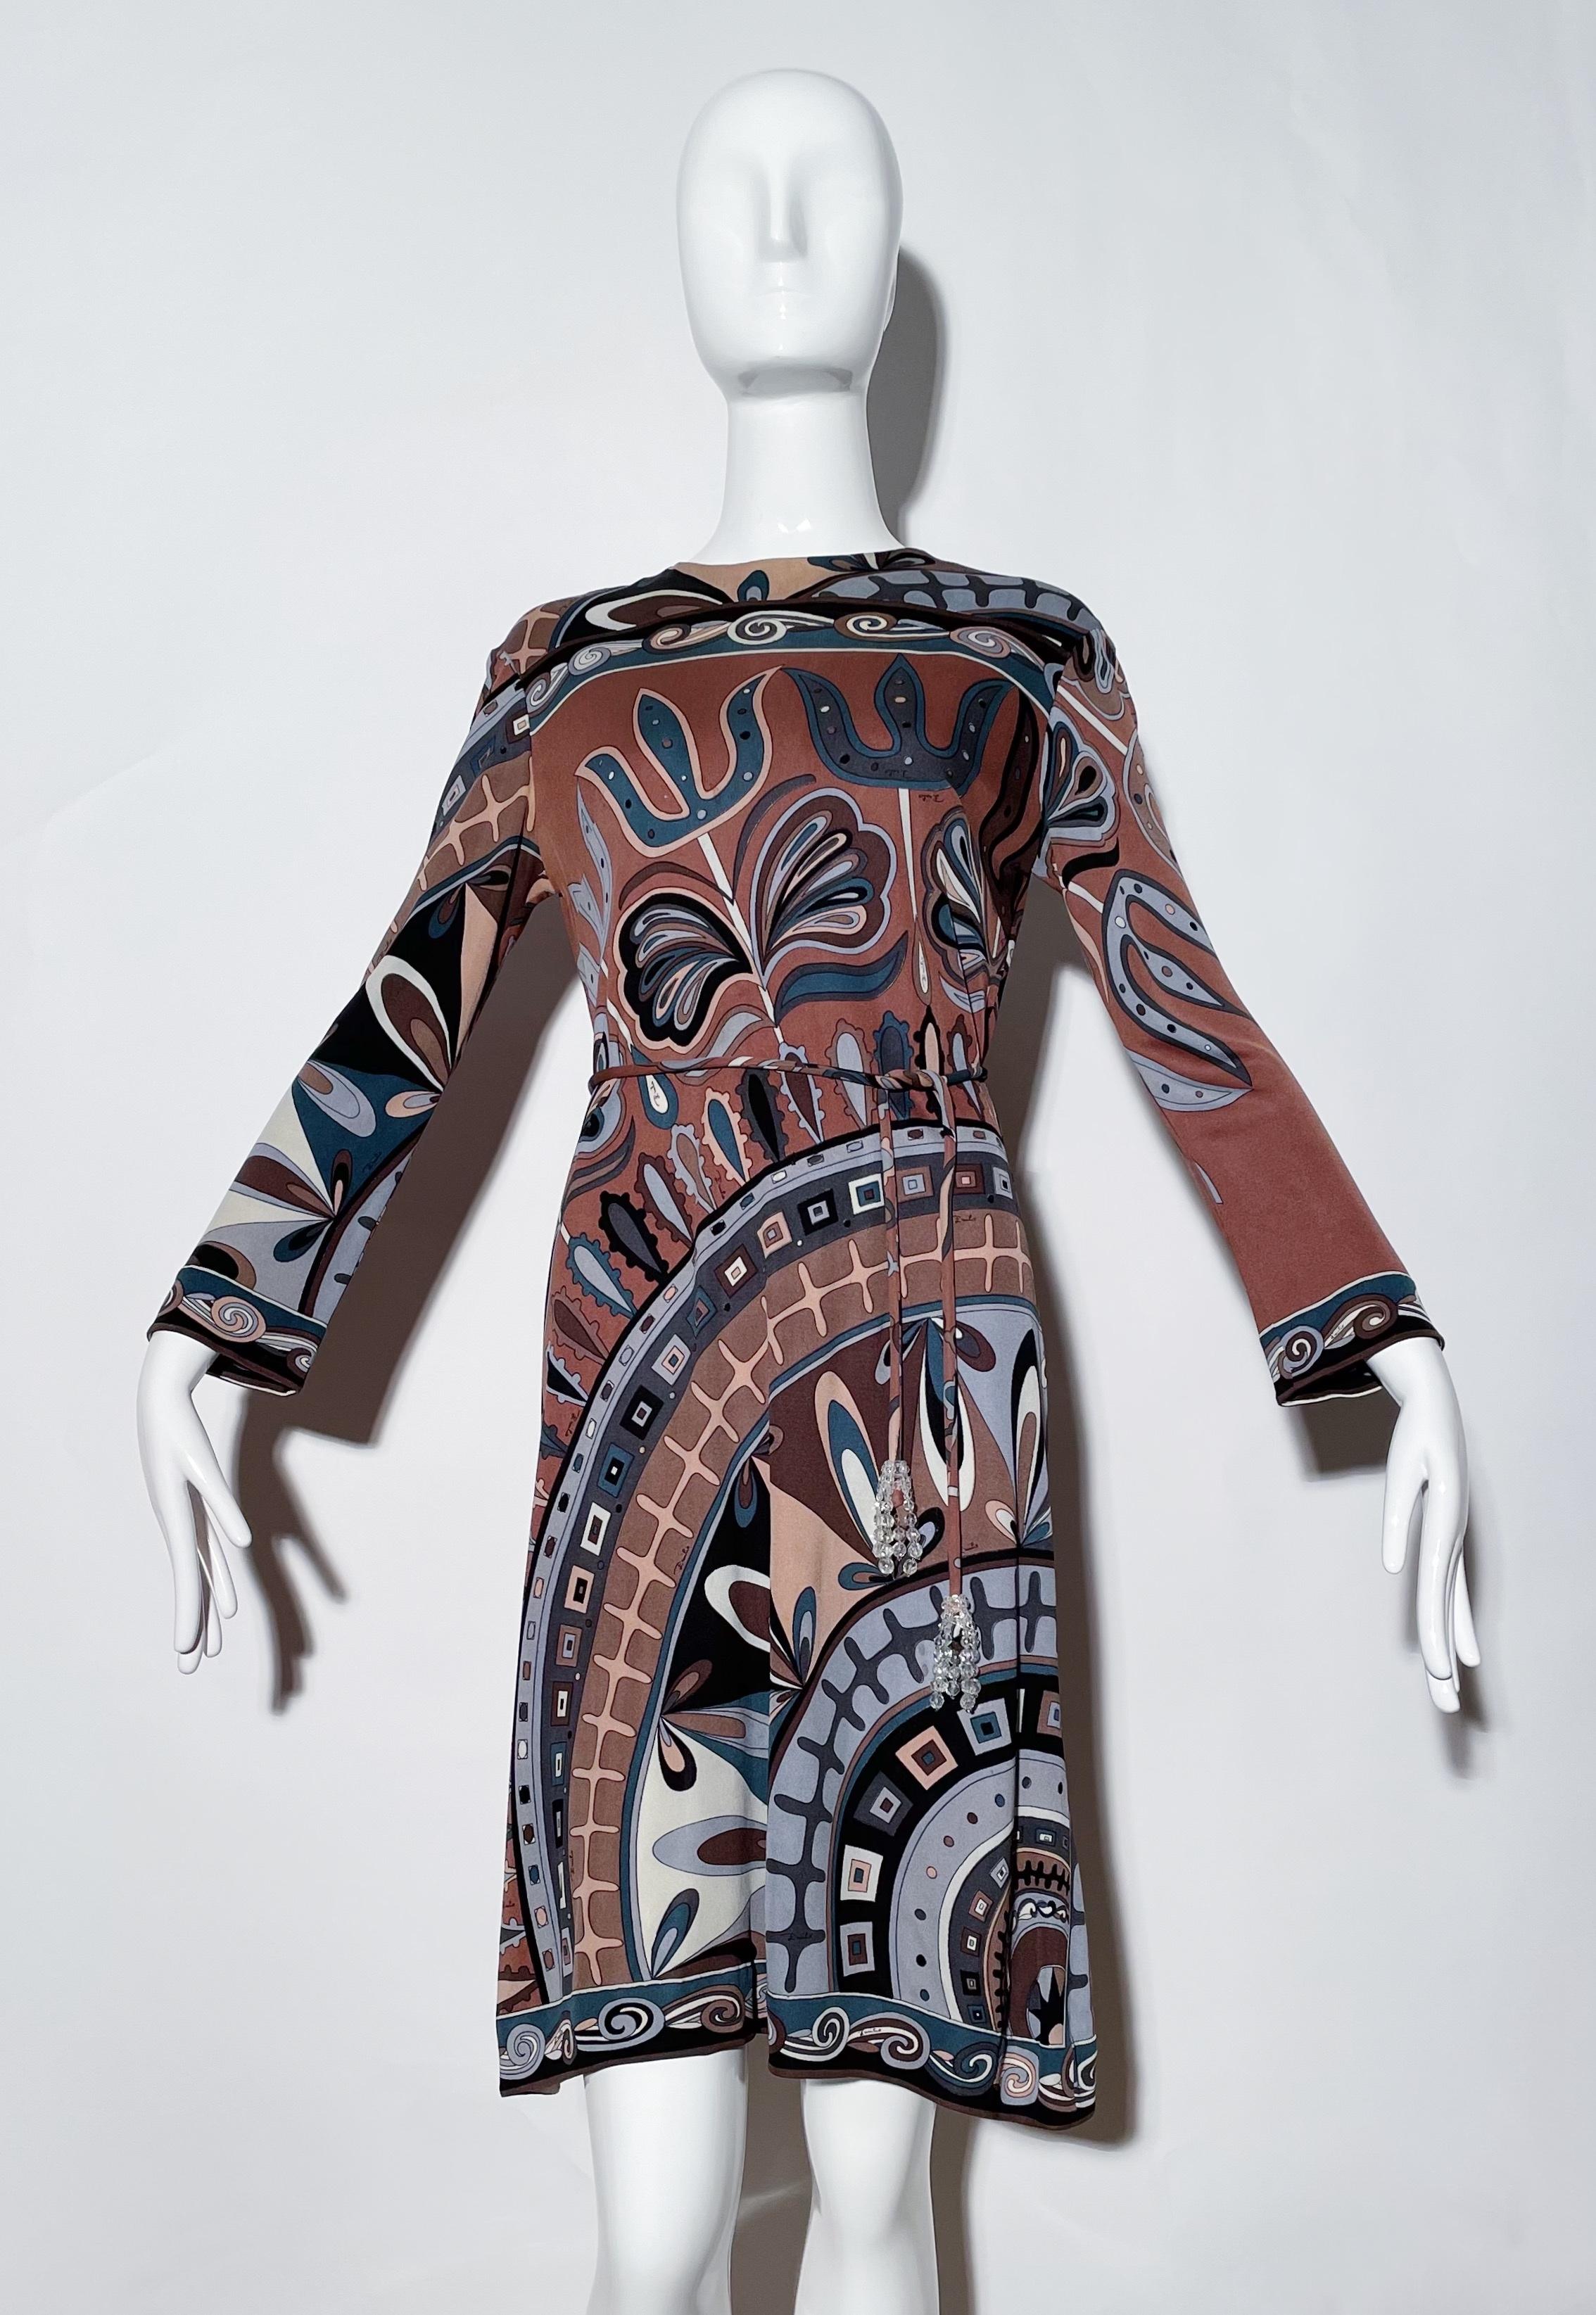 Brown Pucci patterned dress. Longsleeve. Removable belt. Rear zipper closure. Silk. Made in Italy. 
*Condition: excellent vintage condition. No visible flaws.

Measurements Taken Laying Flat (inches)—
Shoulder to Shoulder: 17 in.
Bust: 34 in.
Waist: